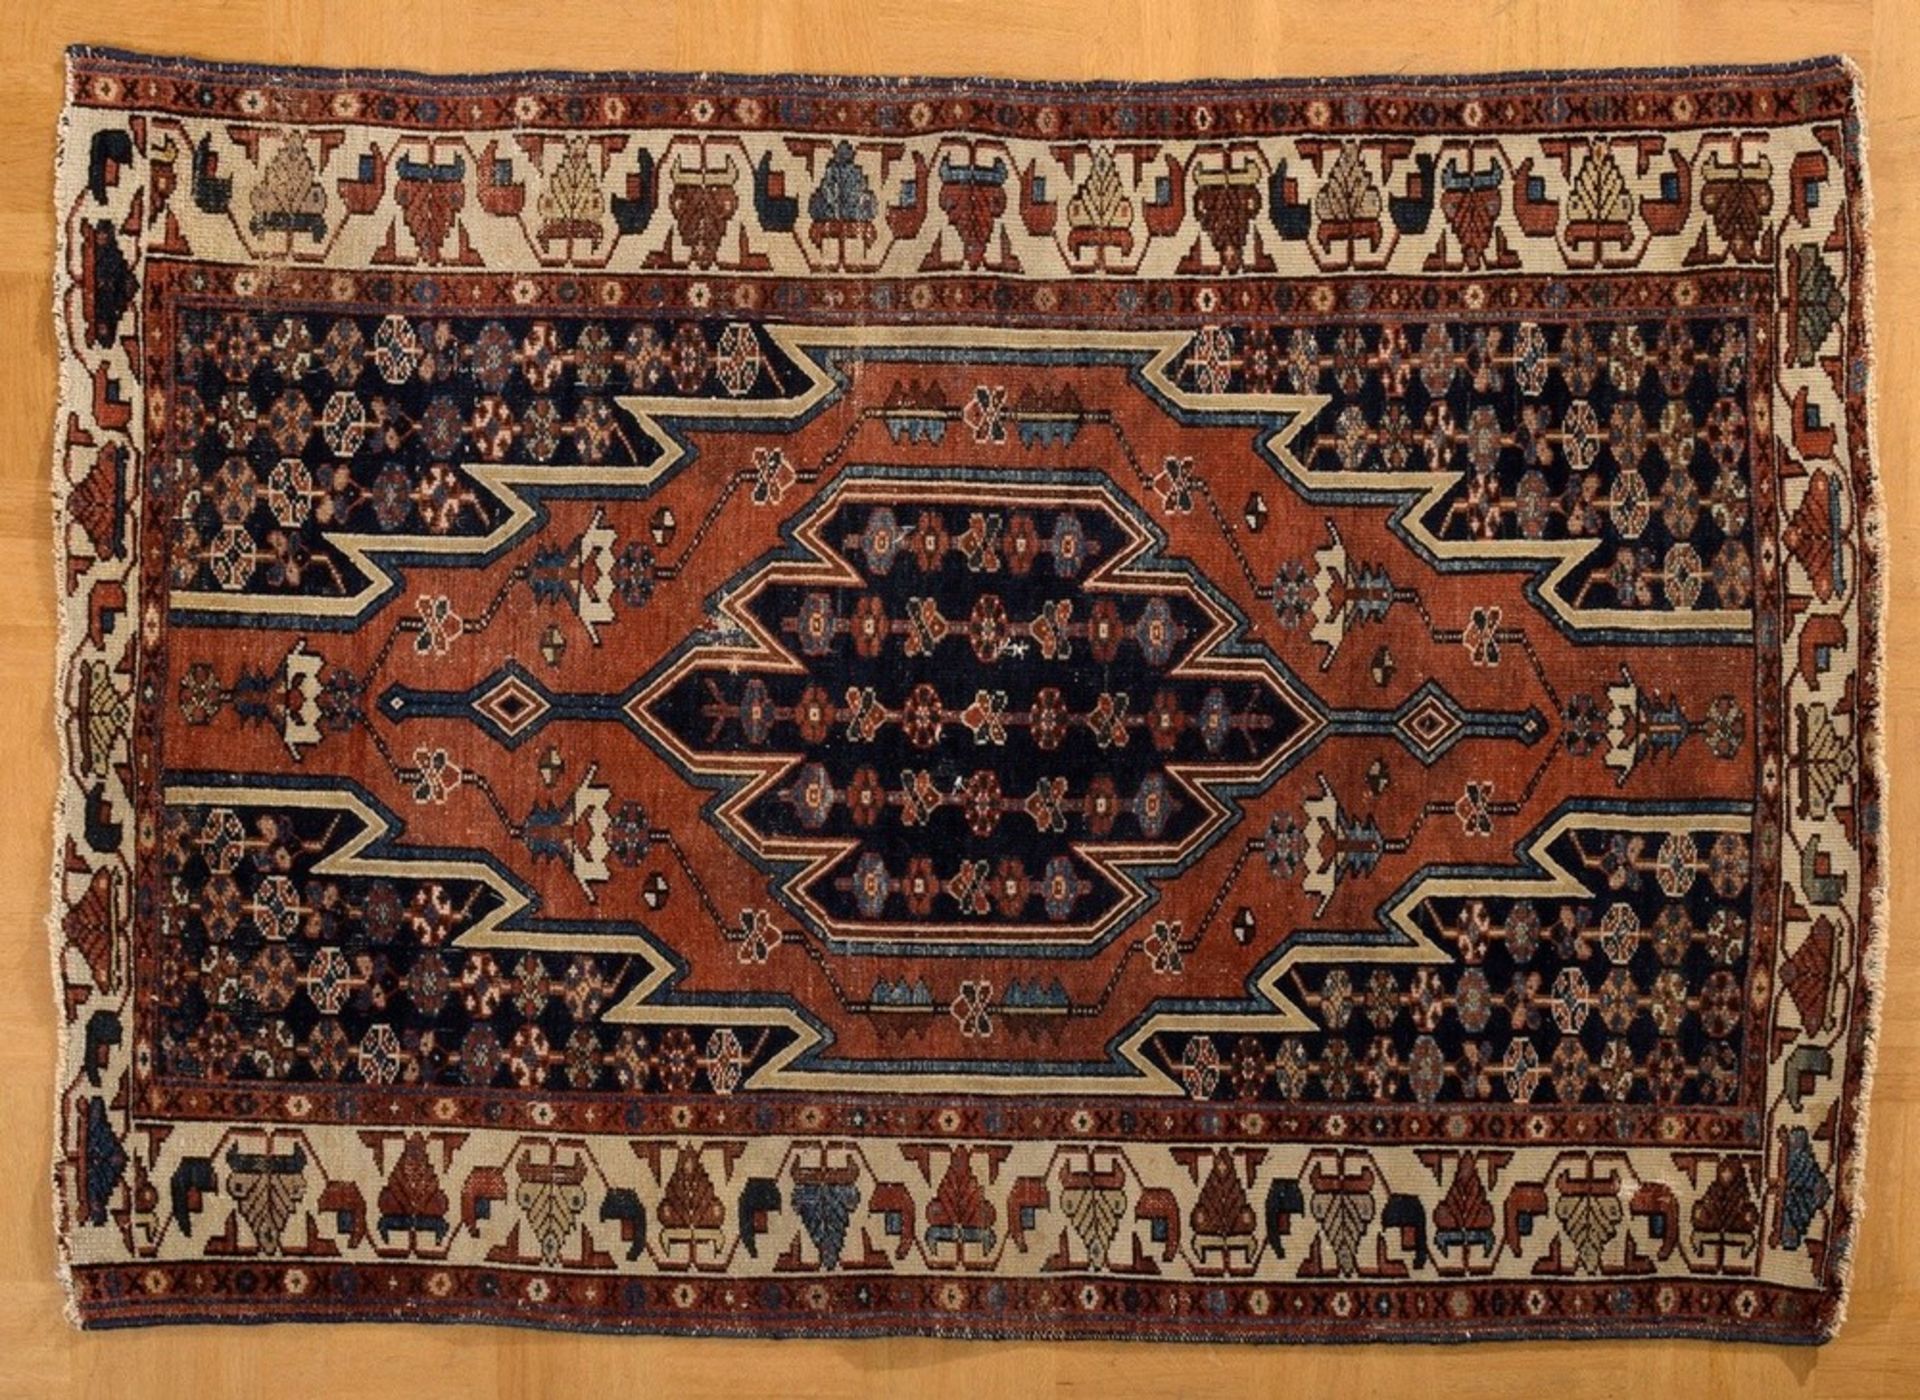 Mazlaghan carpet with typical outline of sharp serrations around the central medallion on a pattern